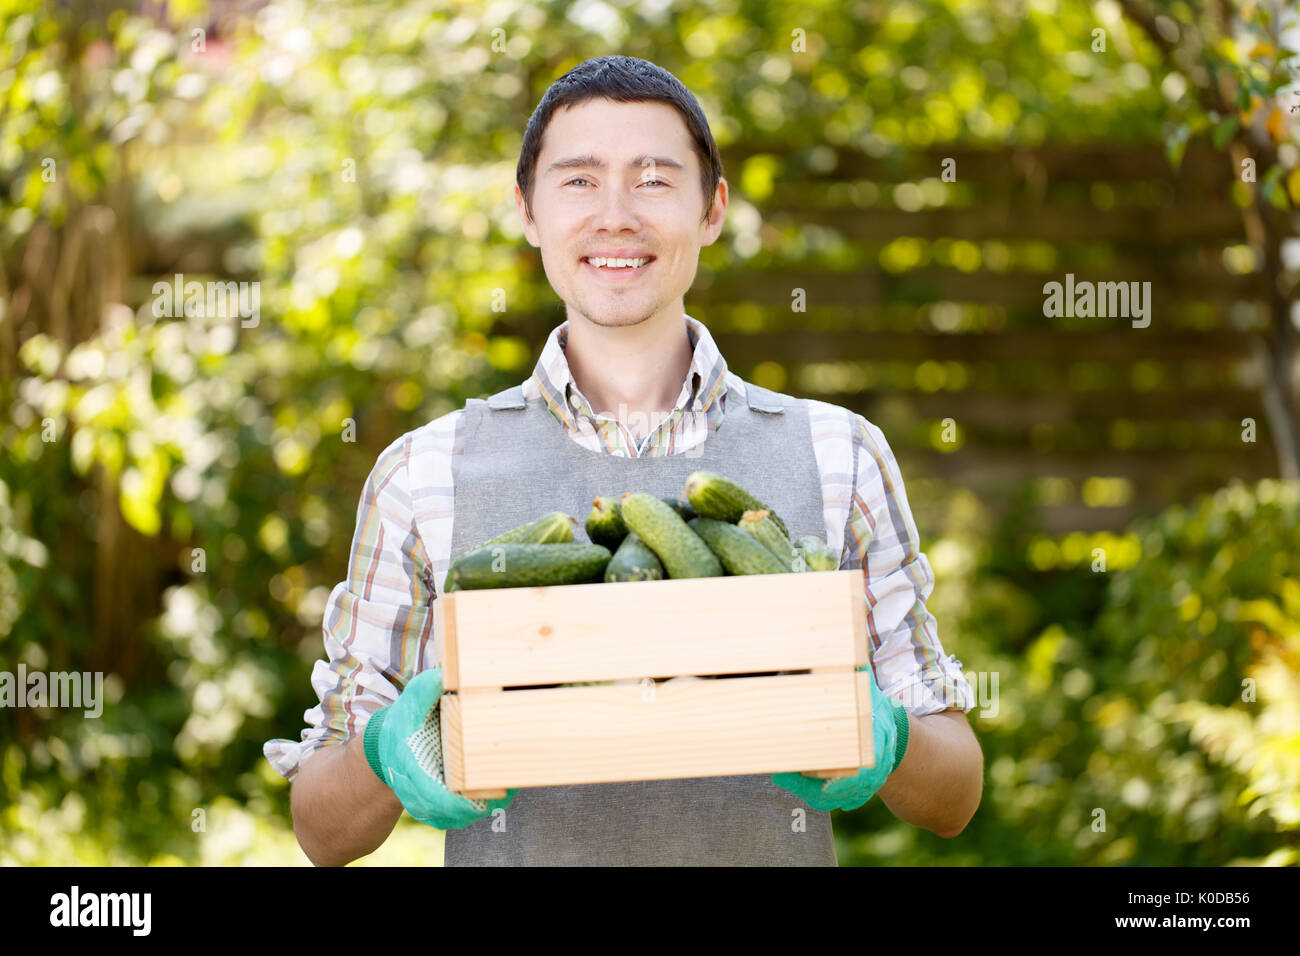 Photo of brunet with cucumbers Stock Photo